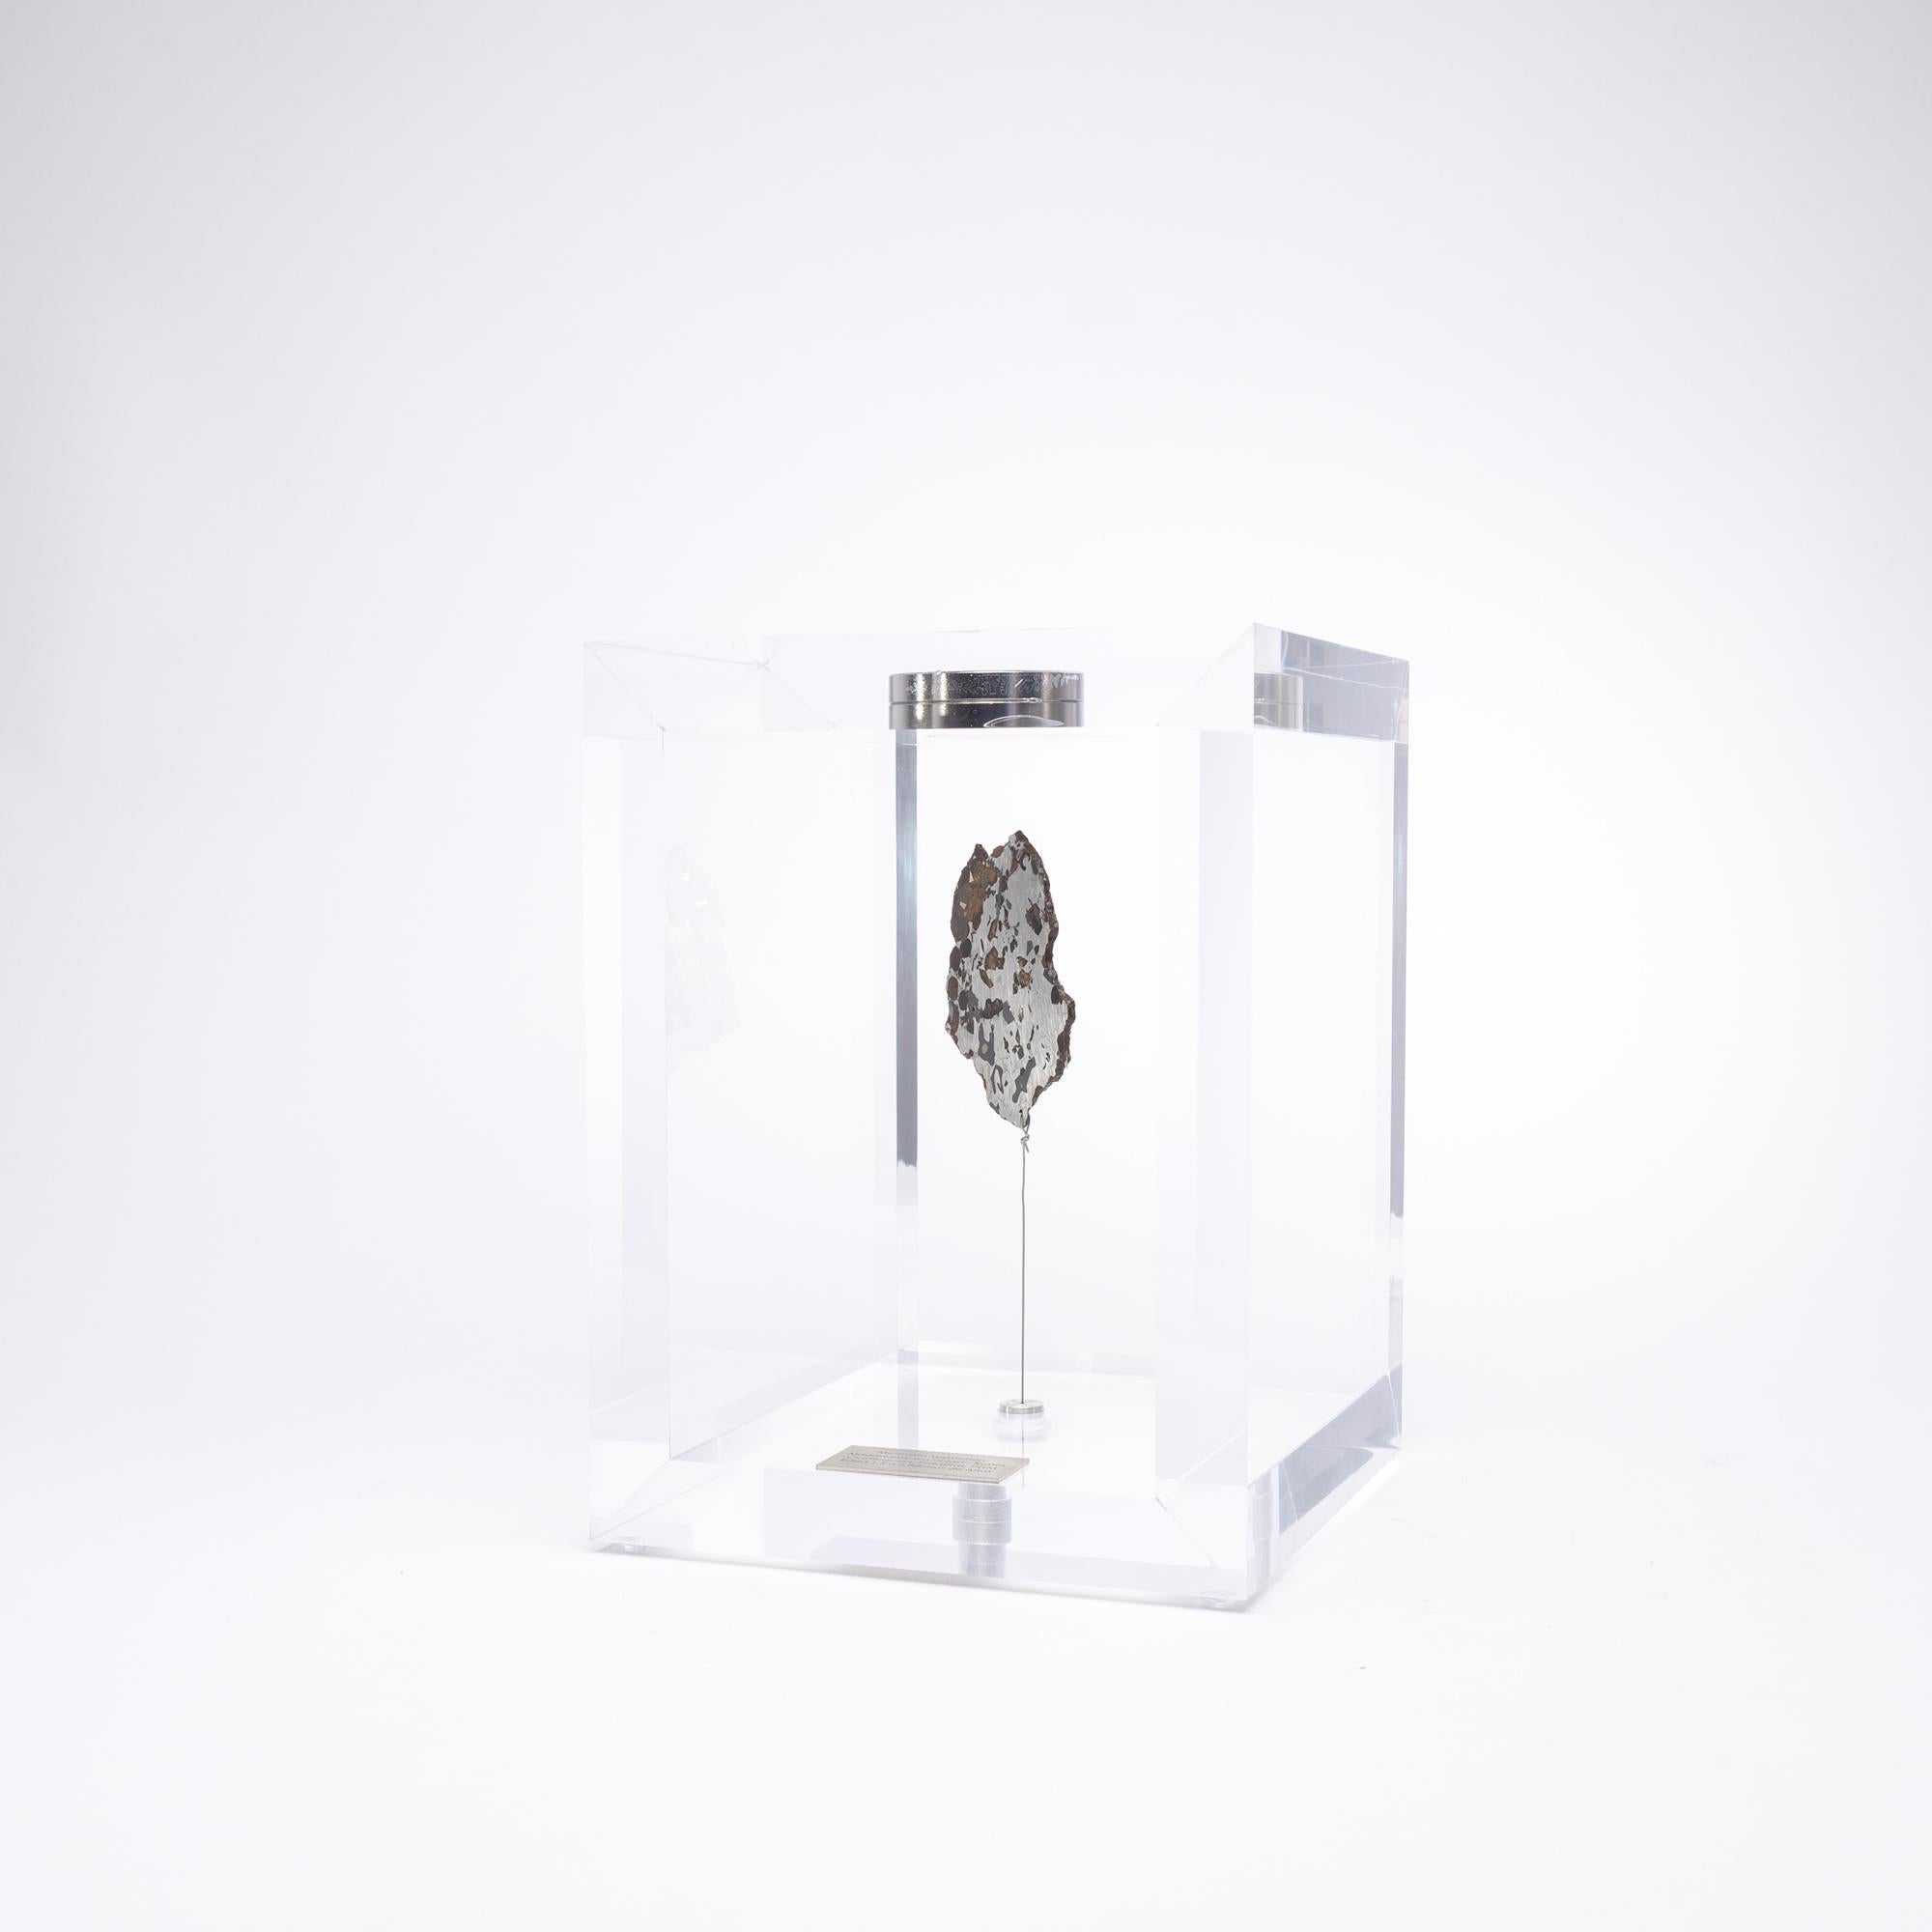 The “Space Box” was designed by Ernesto Duran, as a creative way to enhance the uniqueness of meteorites and could also be use as a decorative piece. Its an acrylic box with a magnet on top and a steel string pulling the meteorite straight